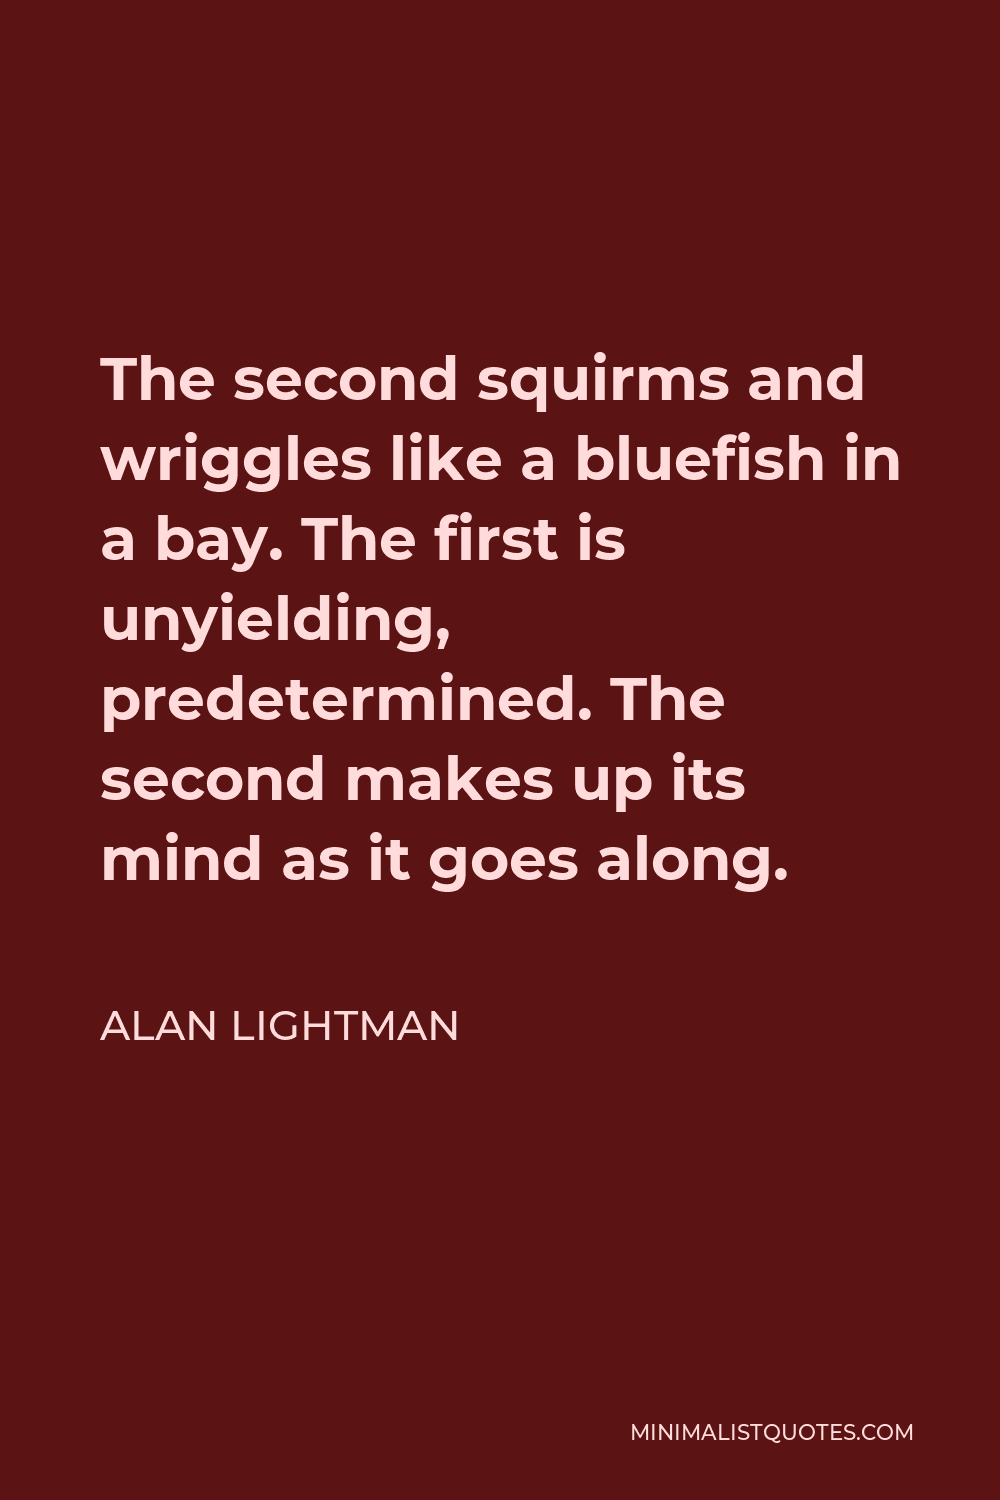 Alan Lightman Quote - The second squirms and wriggles like a bluefish in a bay. The first is unyielding, predetermined. The second makes up its mind as it goes along.